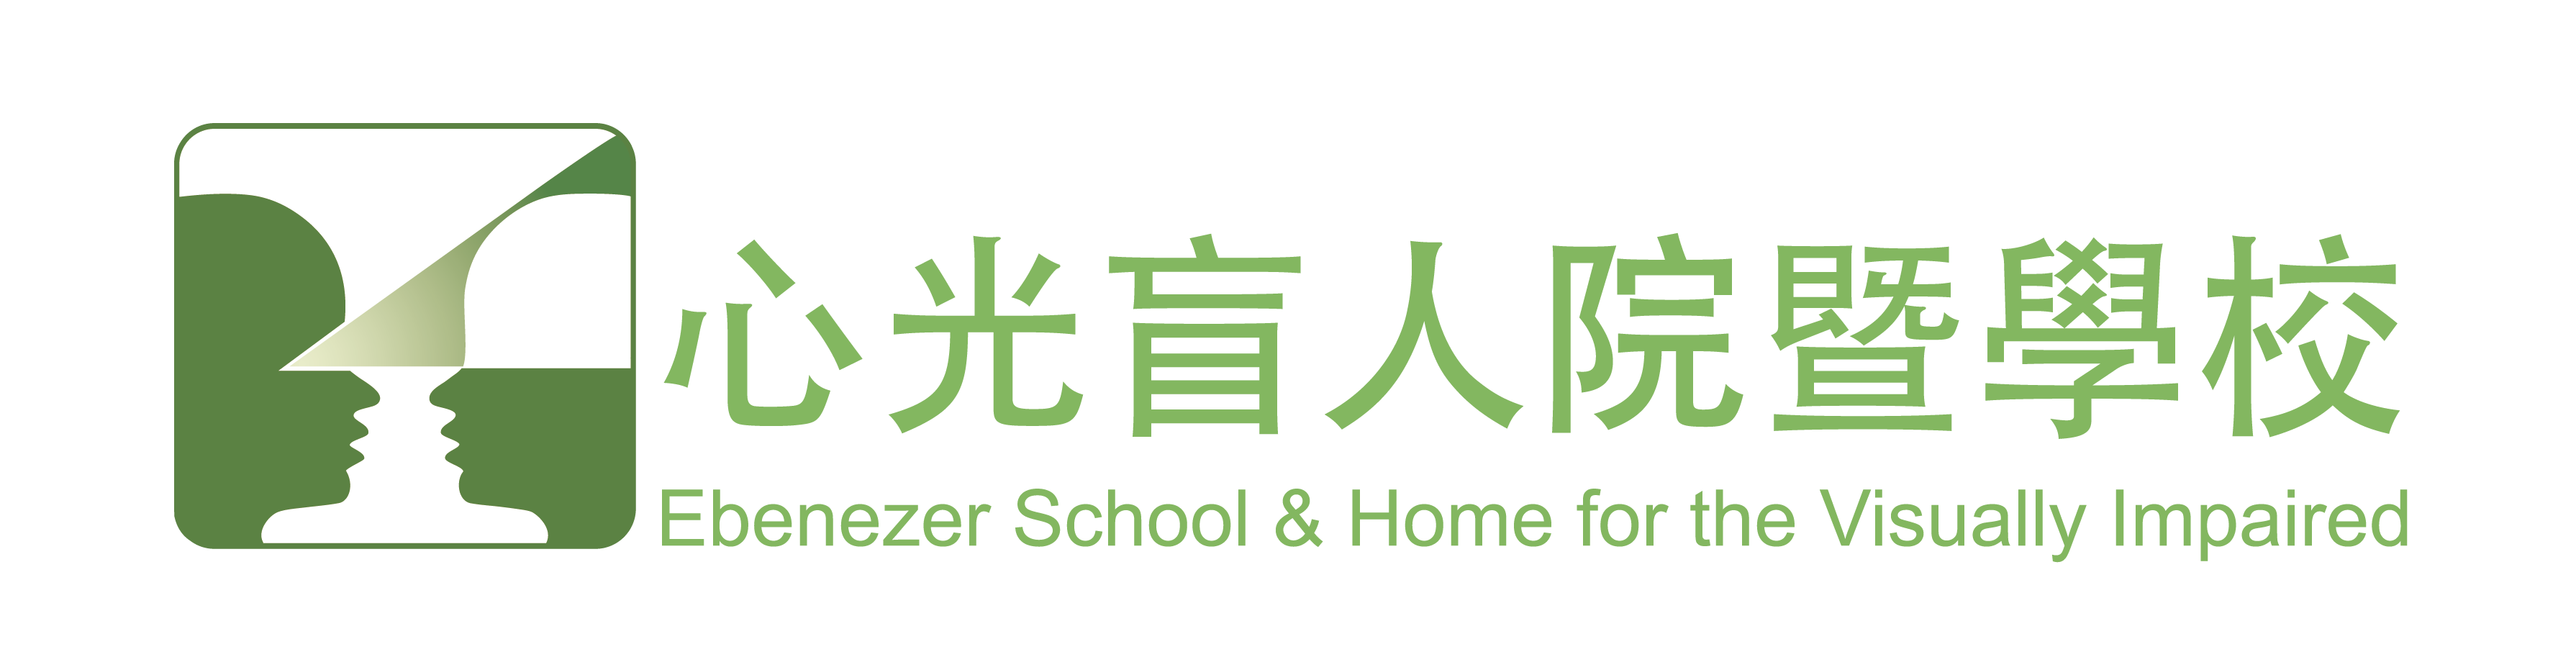 Ebenezer School and Home for the Visually Impaired 心光盲人院暨學校